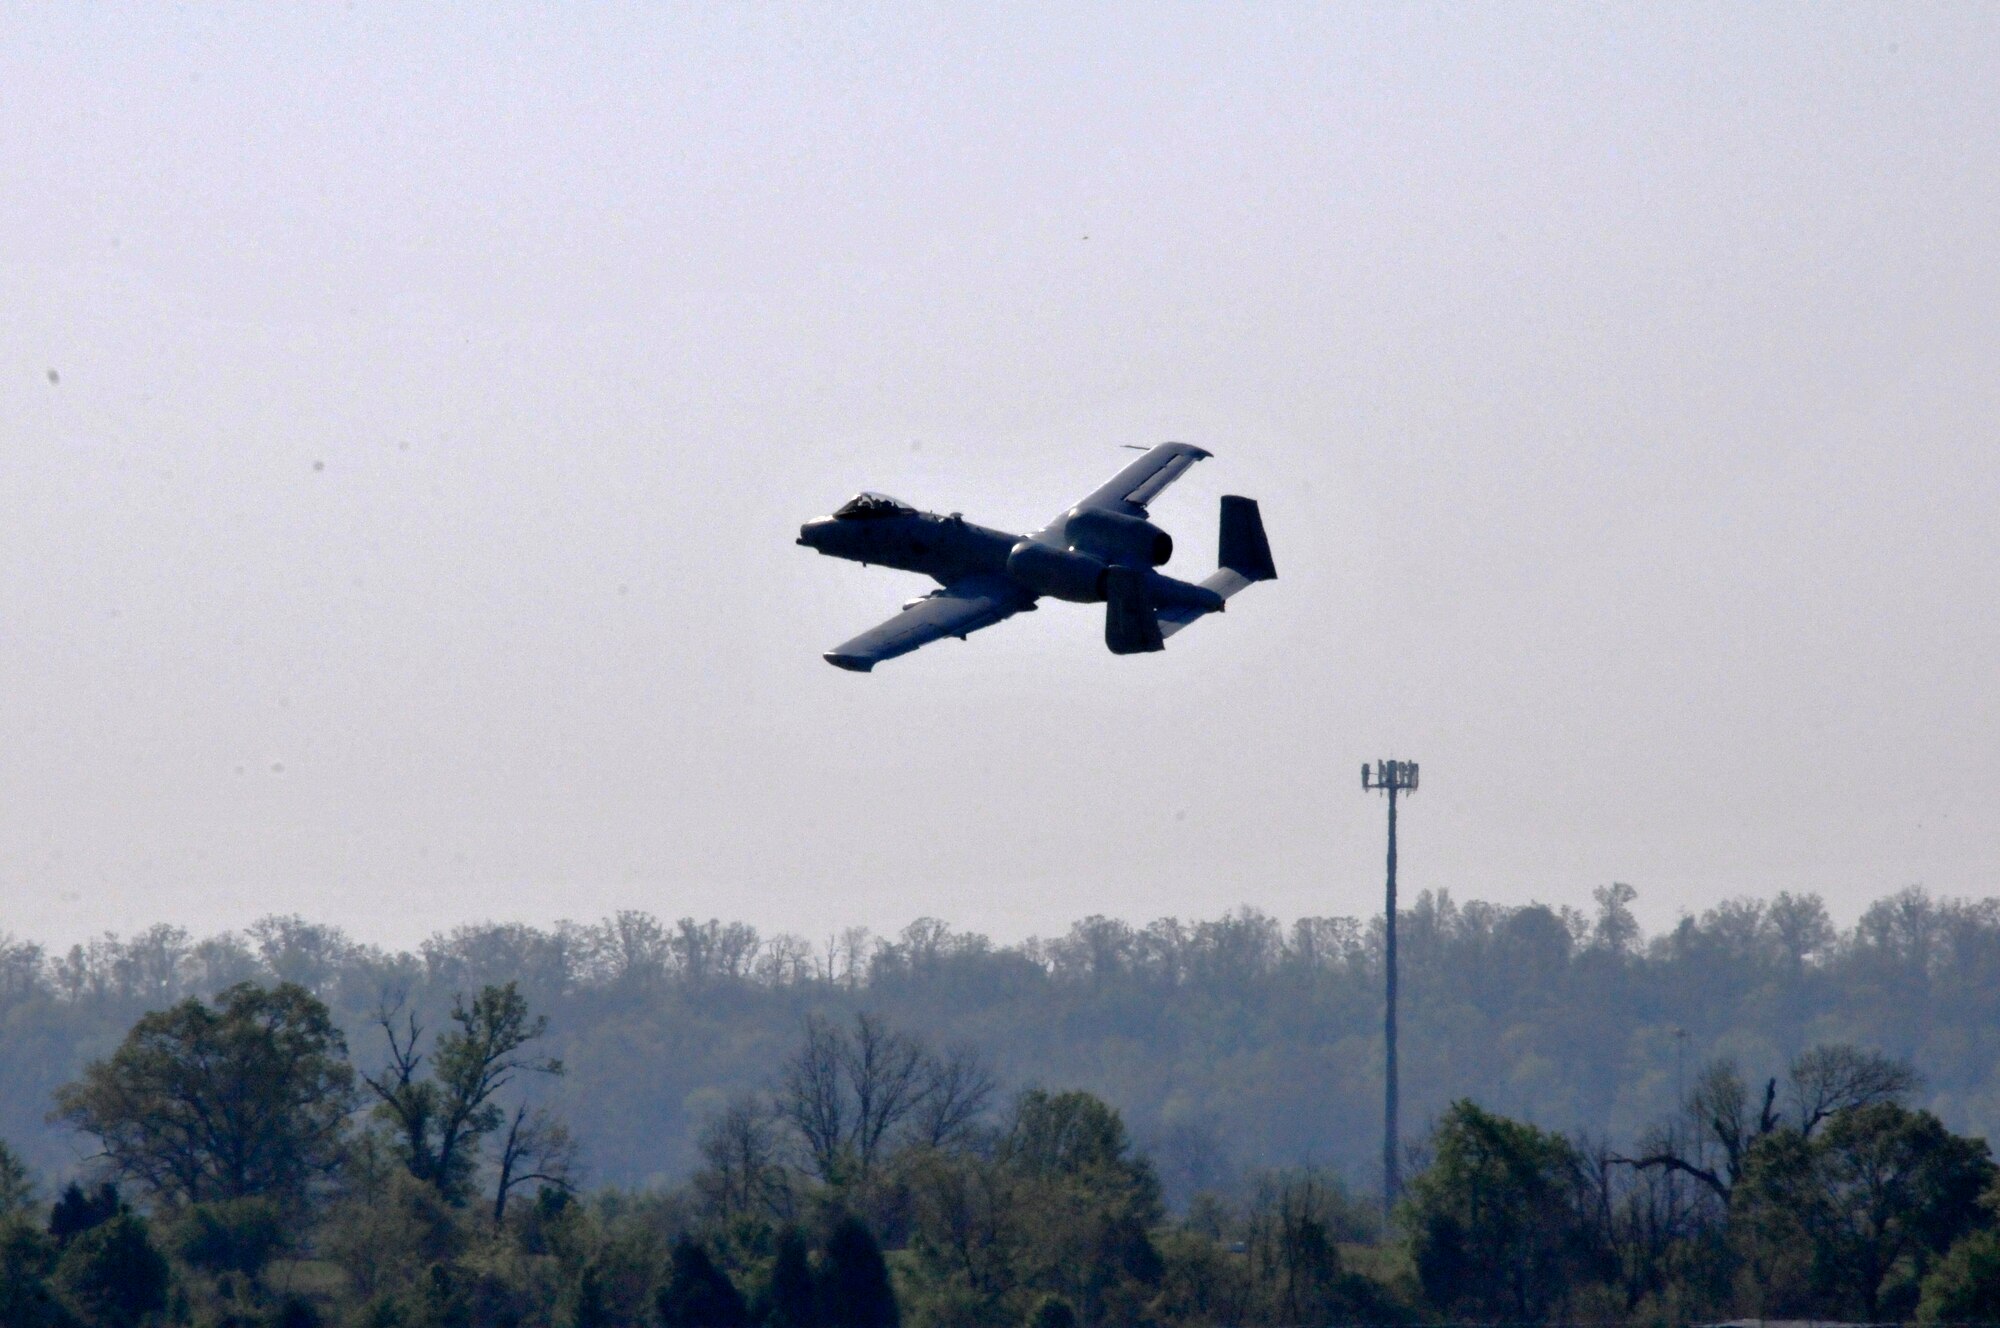 Maj. Michael Roche, a pilot with the 76th Fighter Squadron, Moody Air Force Base, Georgia., takes off in an A-10C Thunderbolt II "Warthog" (Tail No. 586). The aircraft left Ebbing Air National Guard Base, Fort Smith, Arkansas. The aircraft was delivered from the 188th Fighter Wing to Moody Air Force Base, Georgia, April 18, 2014, as part of the 188th's mission conversion from the A-10 to a remotely piloted aircraft, intelligence and targeting mission. The 188th has three remaining A-10s on station. The final two aircraft are scheduled to leave the 188th June 7, 2014. (U.S. Air National Guard photo by Tech Sgt. Josh Lewis/Released)